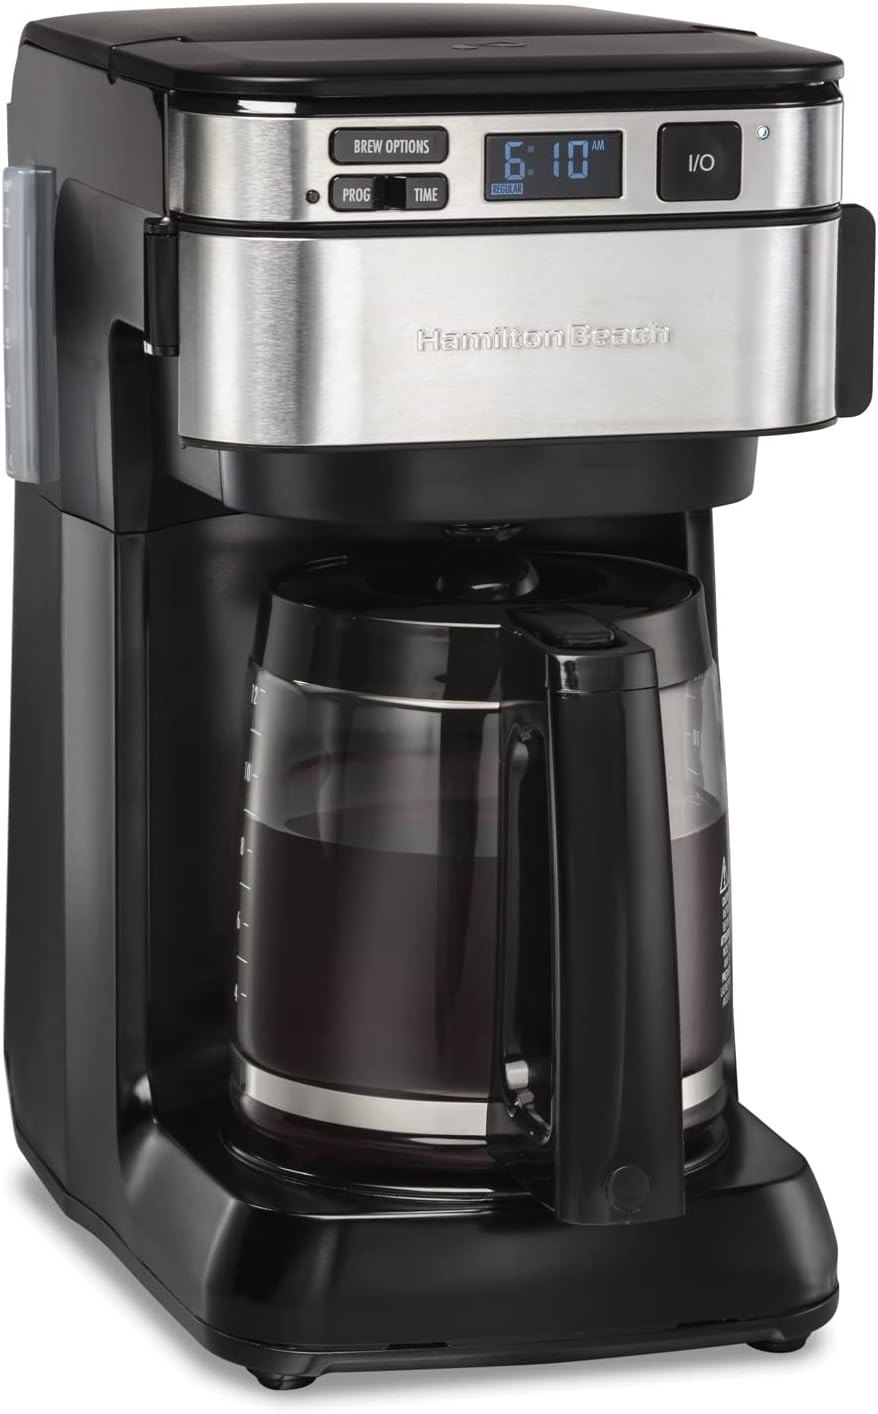 Hamilton Beach Programmable Coffee Maker, 12 Cups, Front Access Easy Fill, Pause  Serve, 3 Brewing Options, Black (46310)